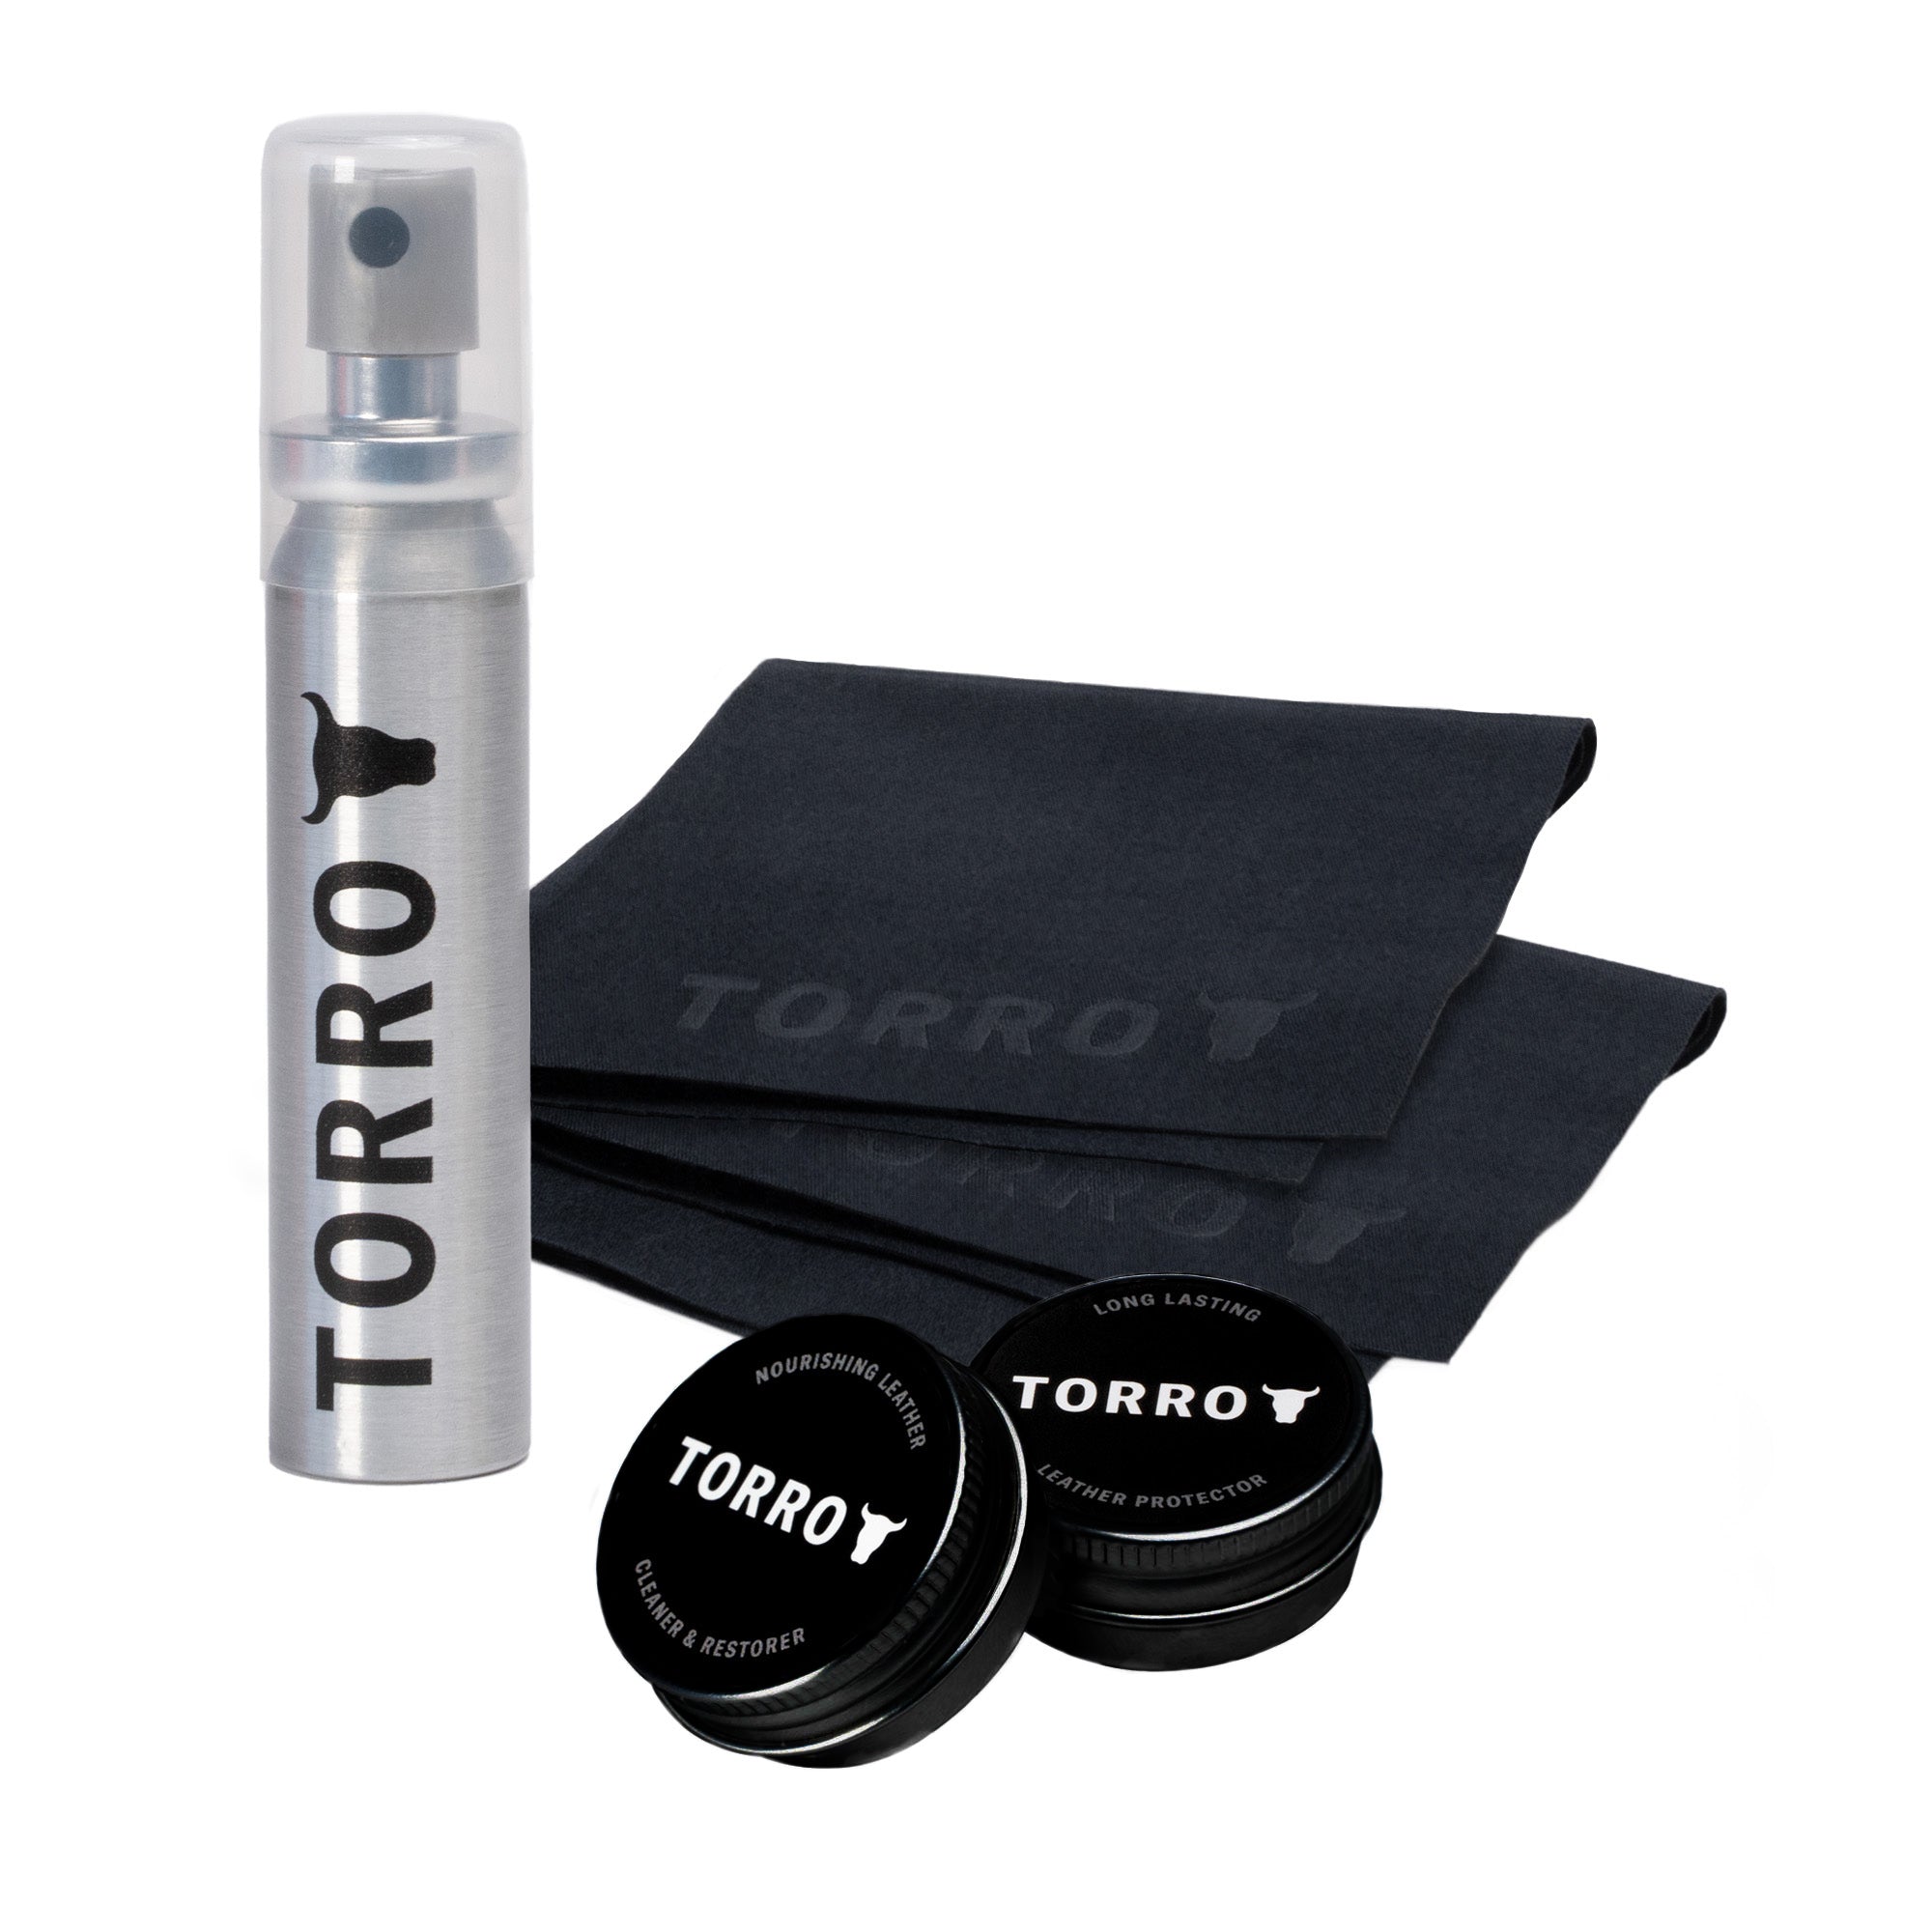 Screen / Lens Cleaning and Leather Care Kit